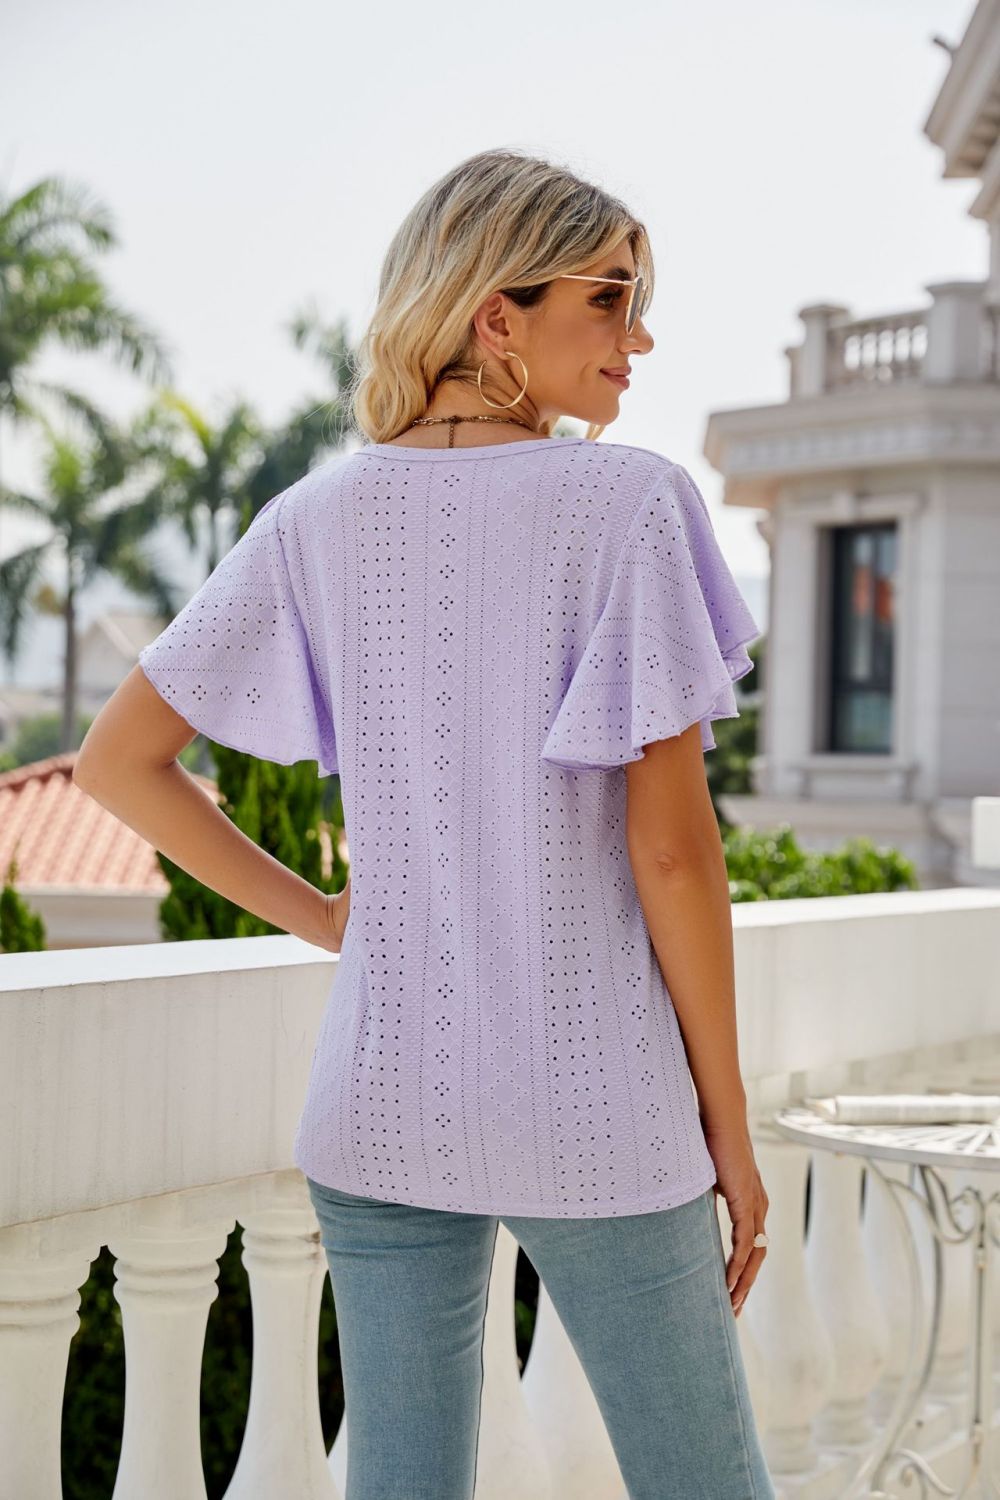 Womens Misses Short Sleeve Eloise Eyelet Flutter Sleeve Round Neck Blouse Top in several color options: Black, White, Light Lime Green, Sage Green, Lilac Lavender Purple, Dusty Purple Mauve, Blush Pink Baby Pink, Yellow, White